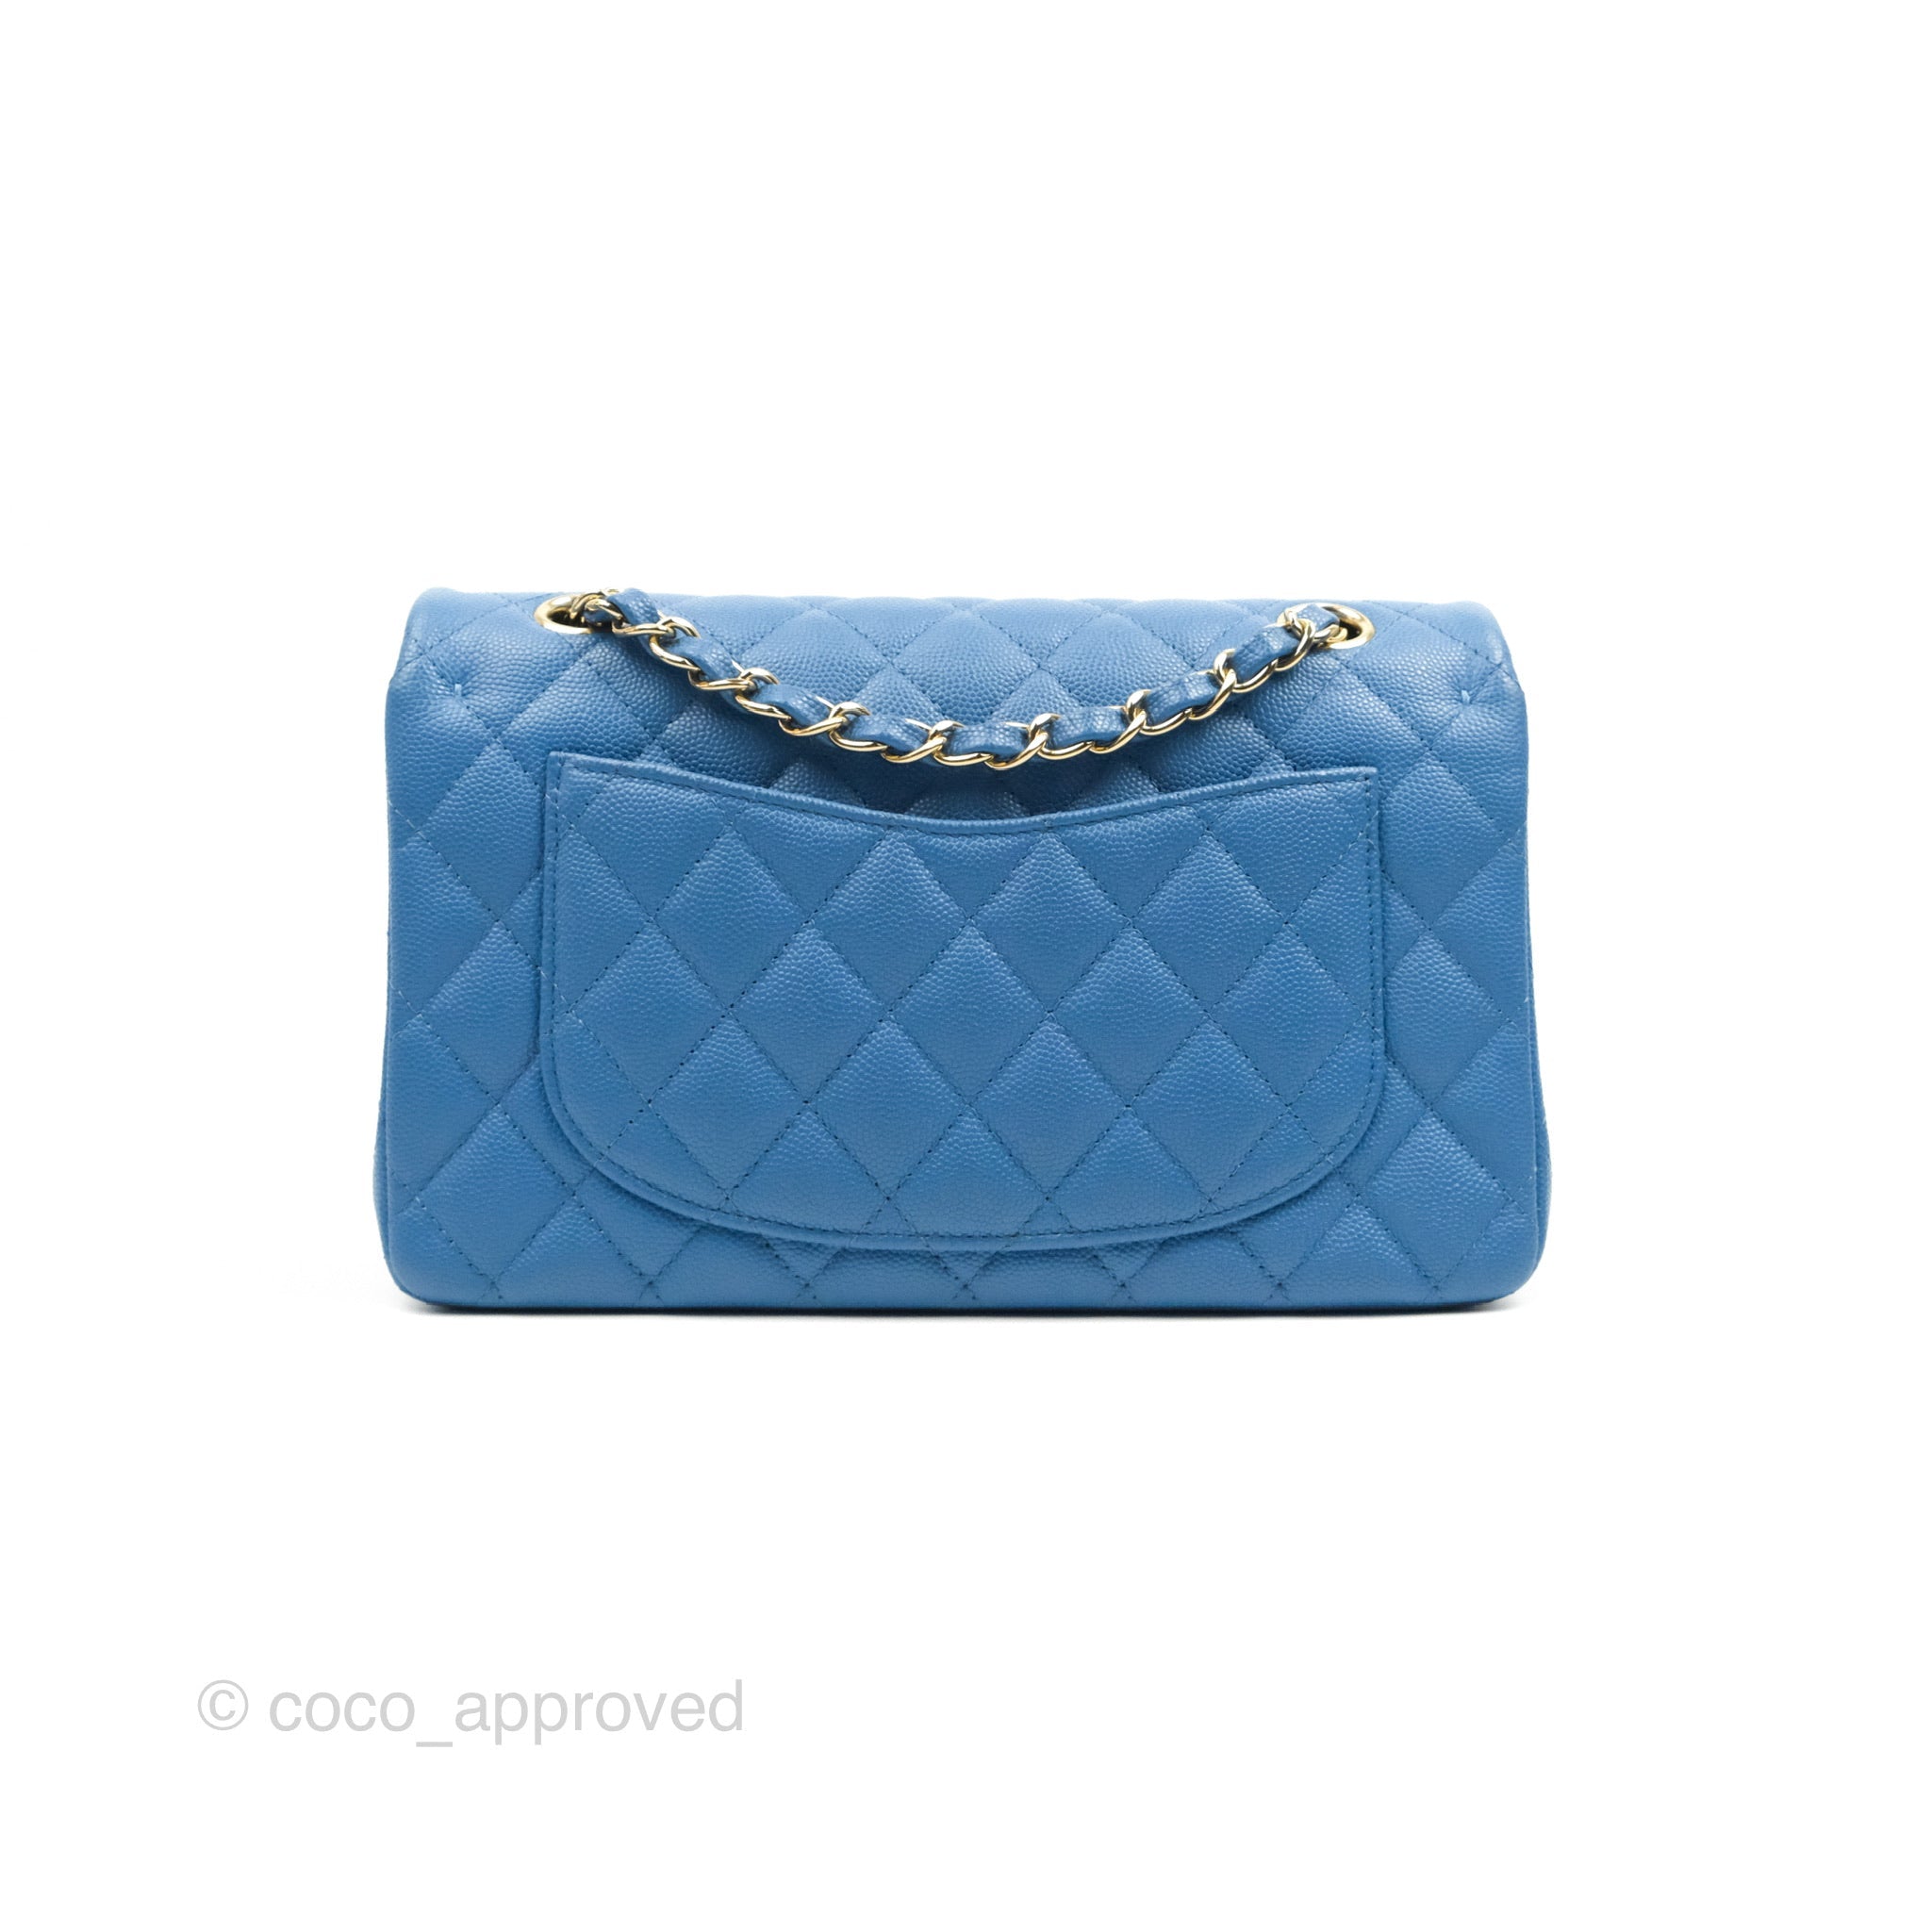 Discover the CHANEL Small Classic Box with Chain Navy Blue Métiers